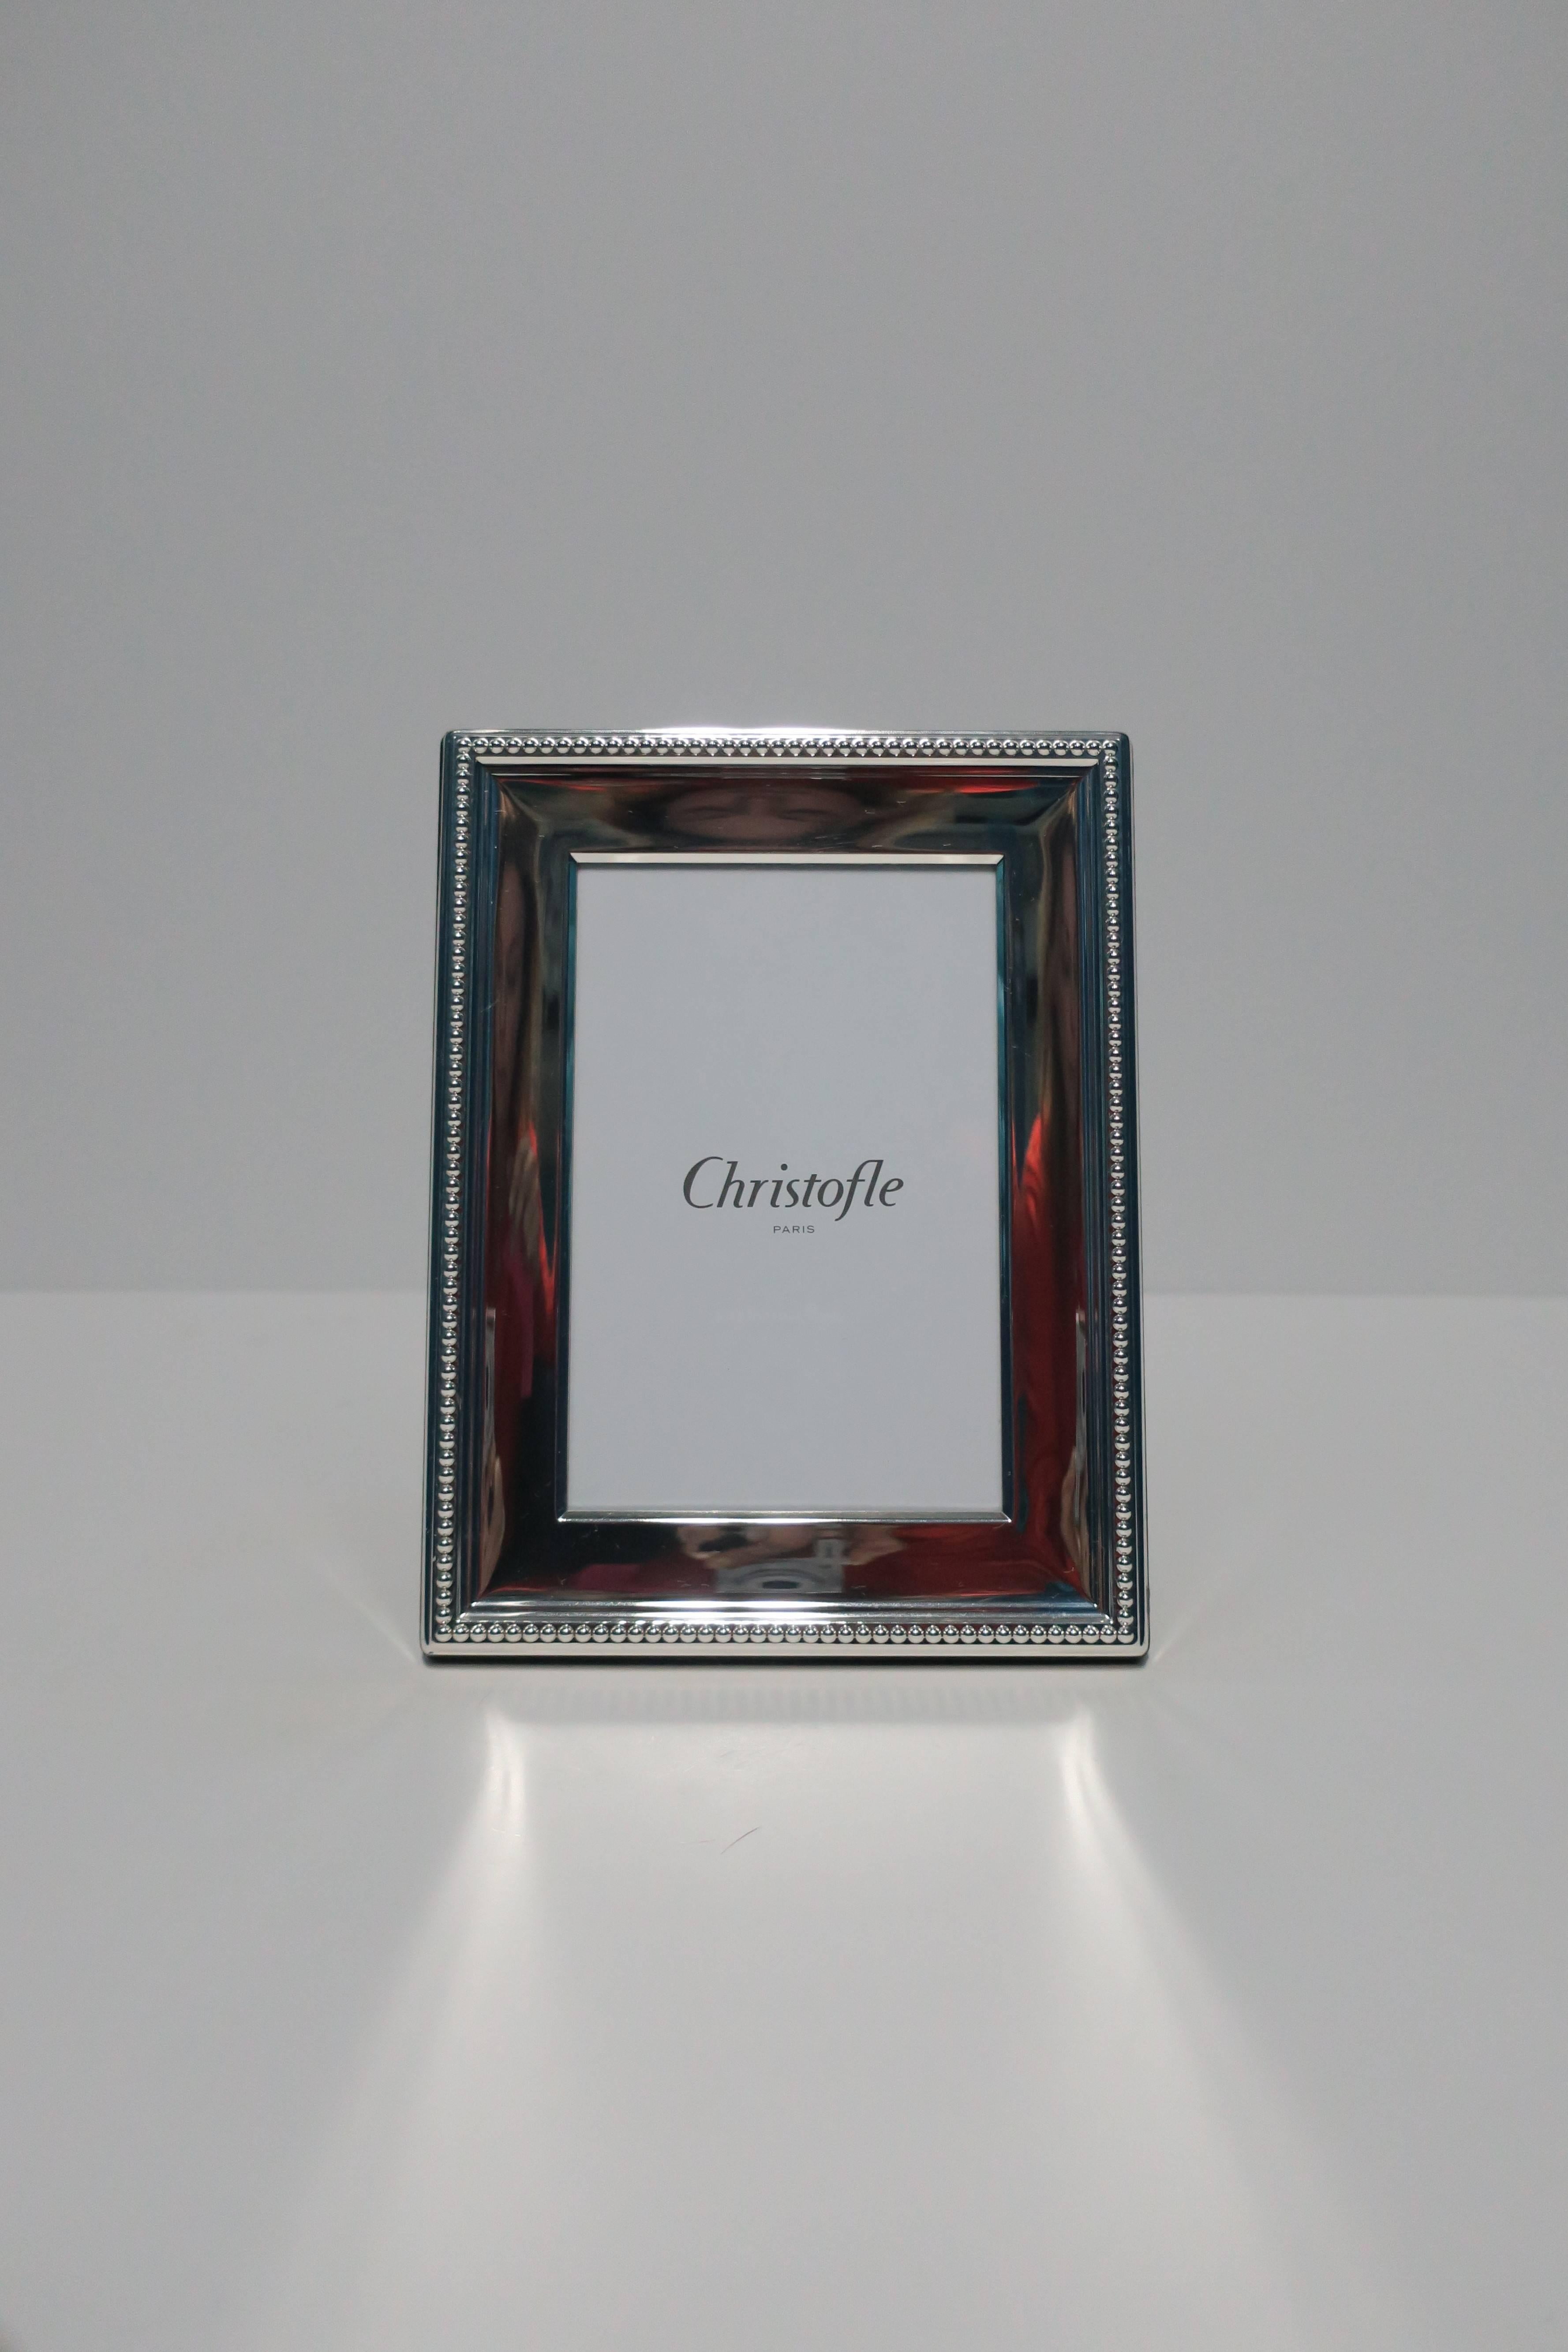 A beautiful picture frame by luxury brand Christofle. Frame is a sterling sliver plate covered with a clear lacquer to prevent tarnishing. Frame can be positioned vertically or horizontally, as show in images. With maker's mark on back. Frame